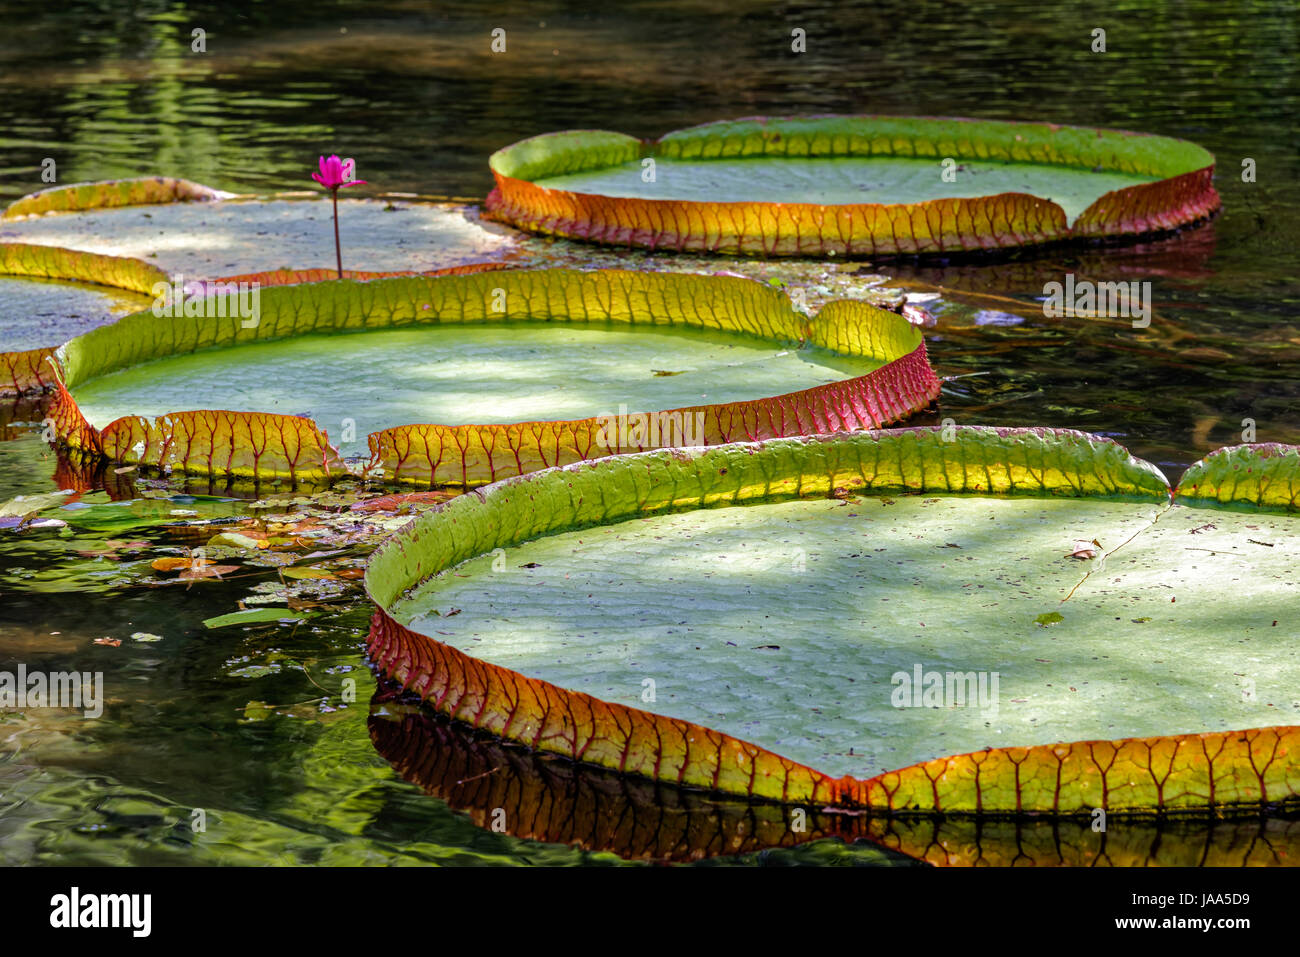 Victoria Regia, large common tropical aquatic plant in the Brazilian Amazon region with its circular leaf floating on the water surface. Stock Photo